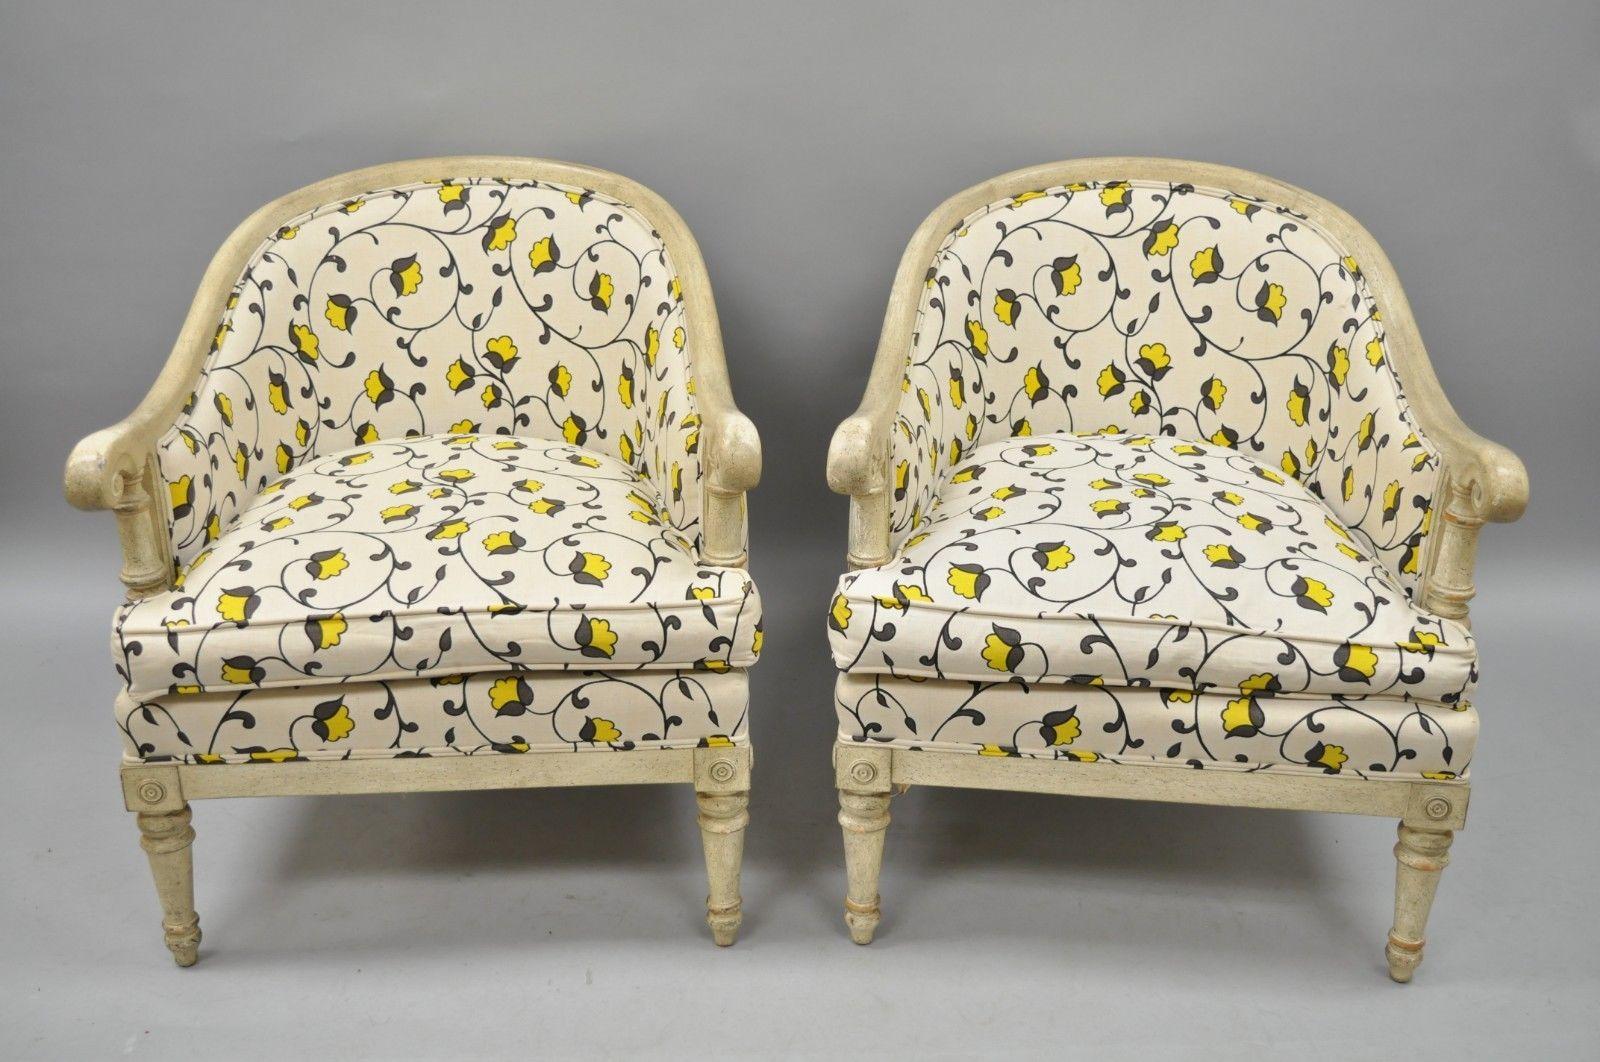 Pair of French neoclassical/Directoire style cream distress painted barrel back club chairs. Item features solid carved wood frames, shapely barrel backs, tapered legs, rolled arms, yellow floral print upholstery, cream distress painted finish, and